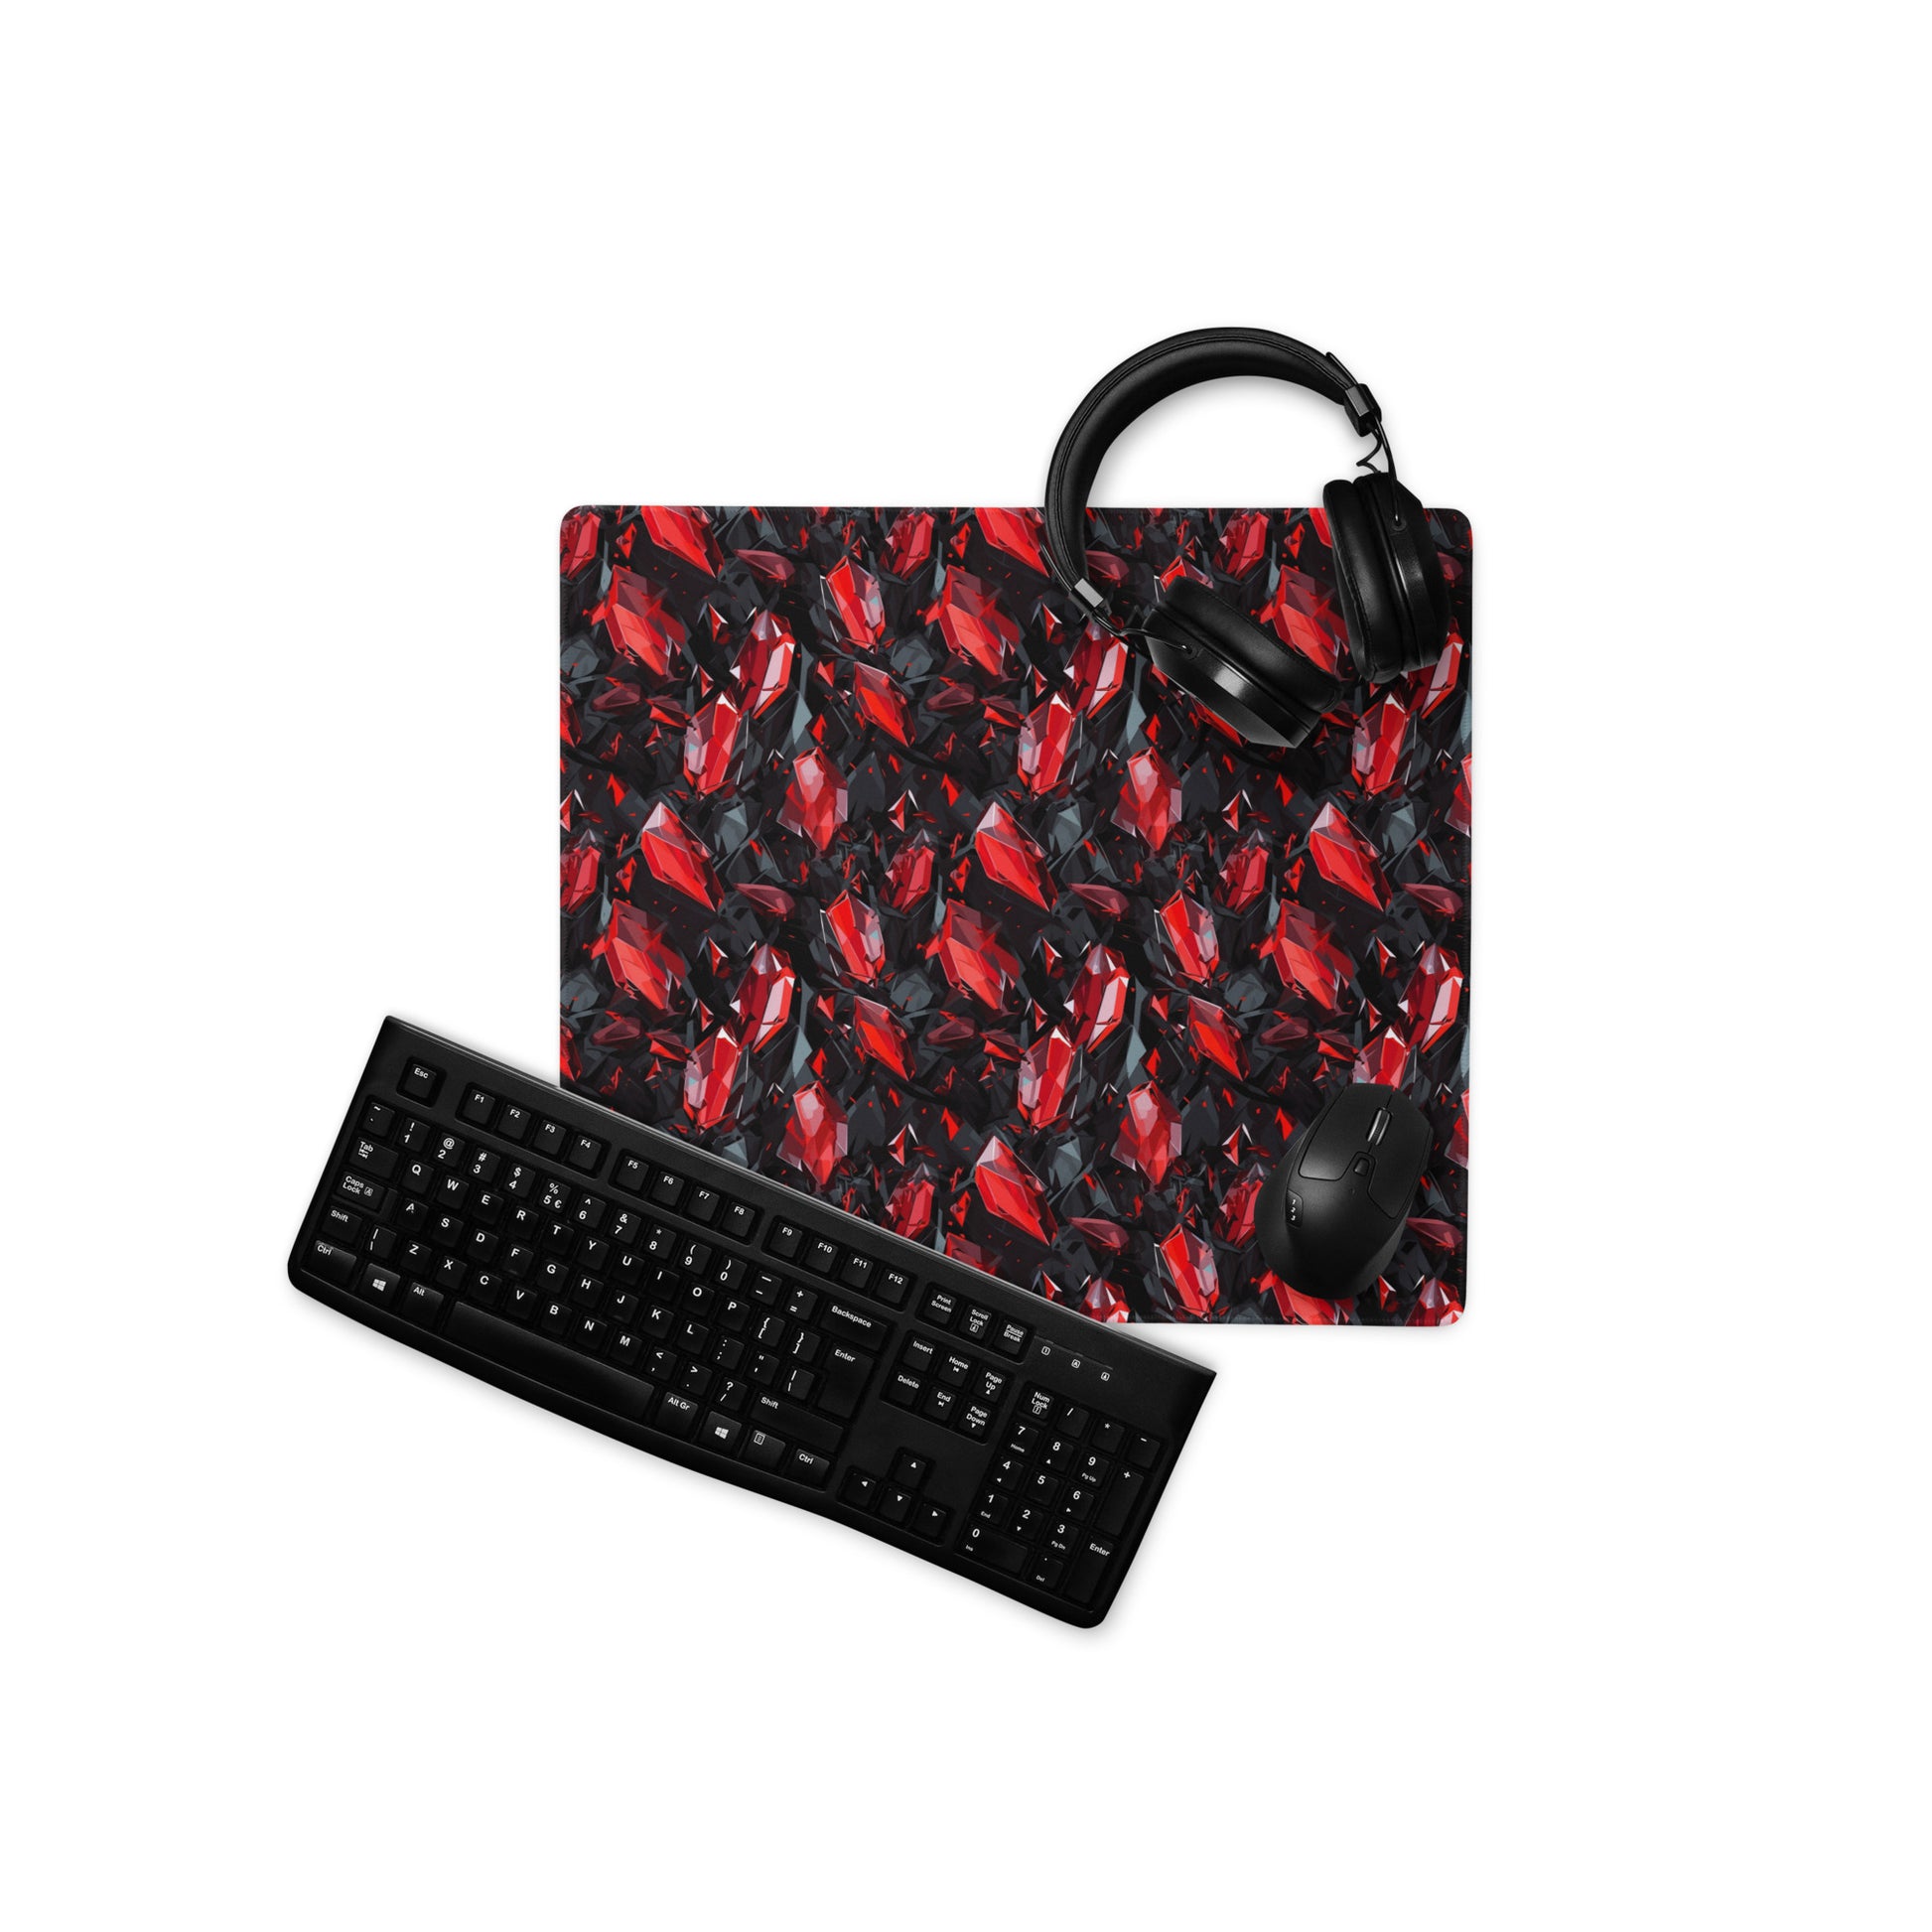 An 18" x 16" gaming desk pad with black and red crystals. A keyboard, mouse, and headphones sit on it.